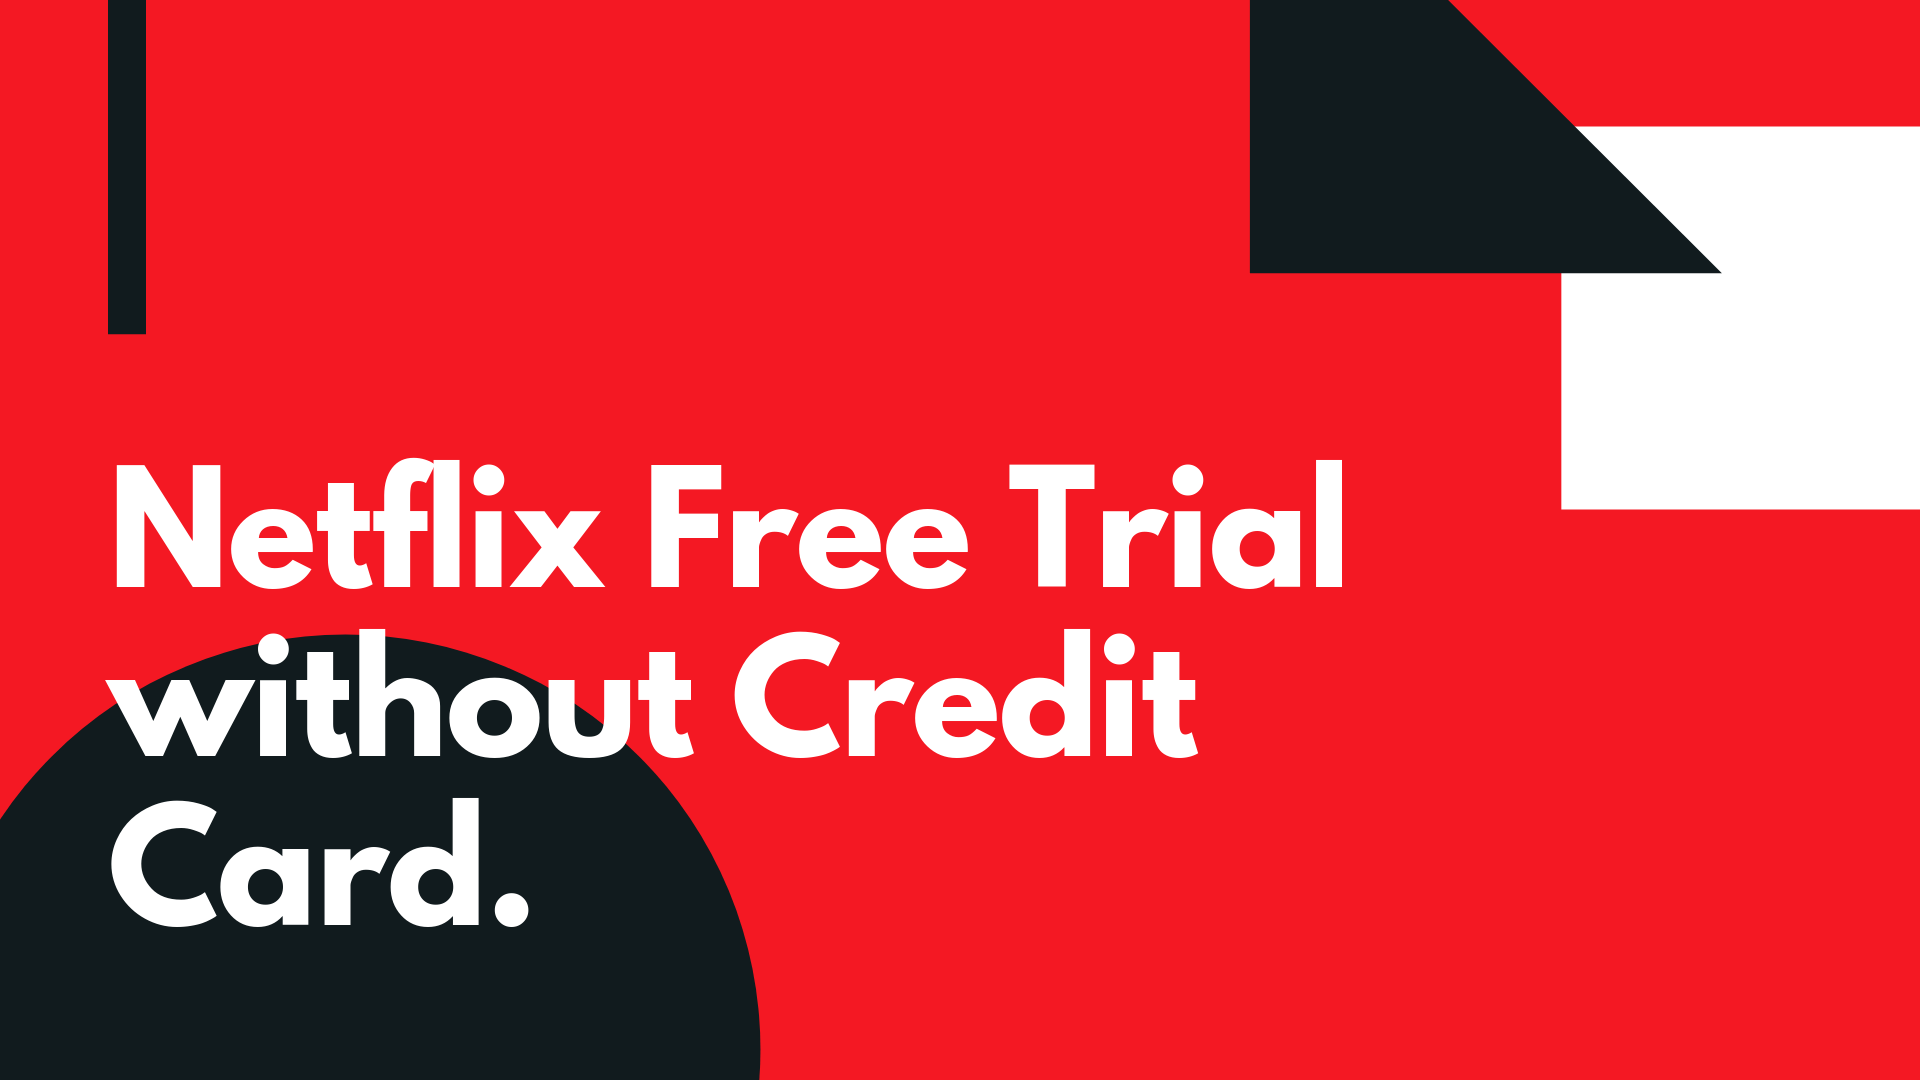 Netflix Free Trial without Credit Card.